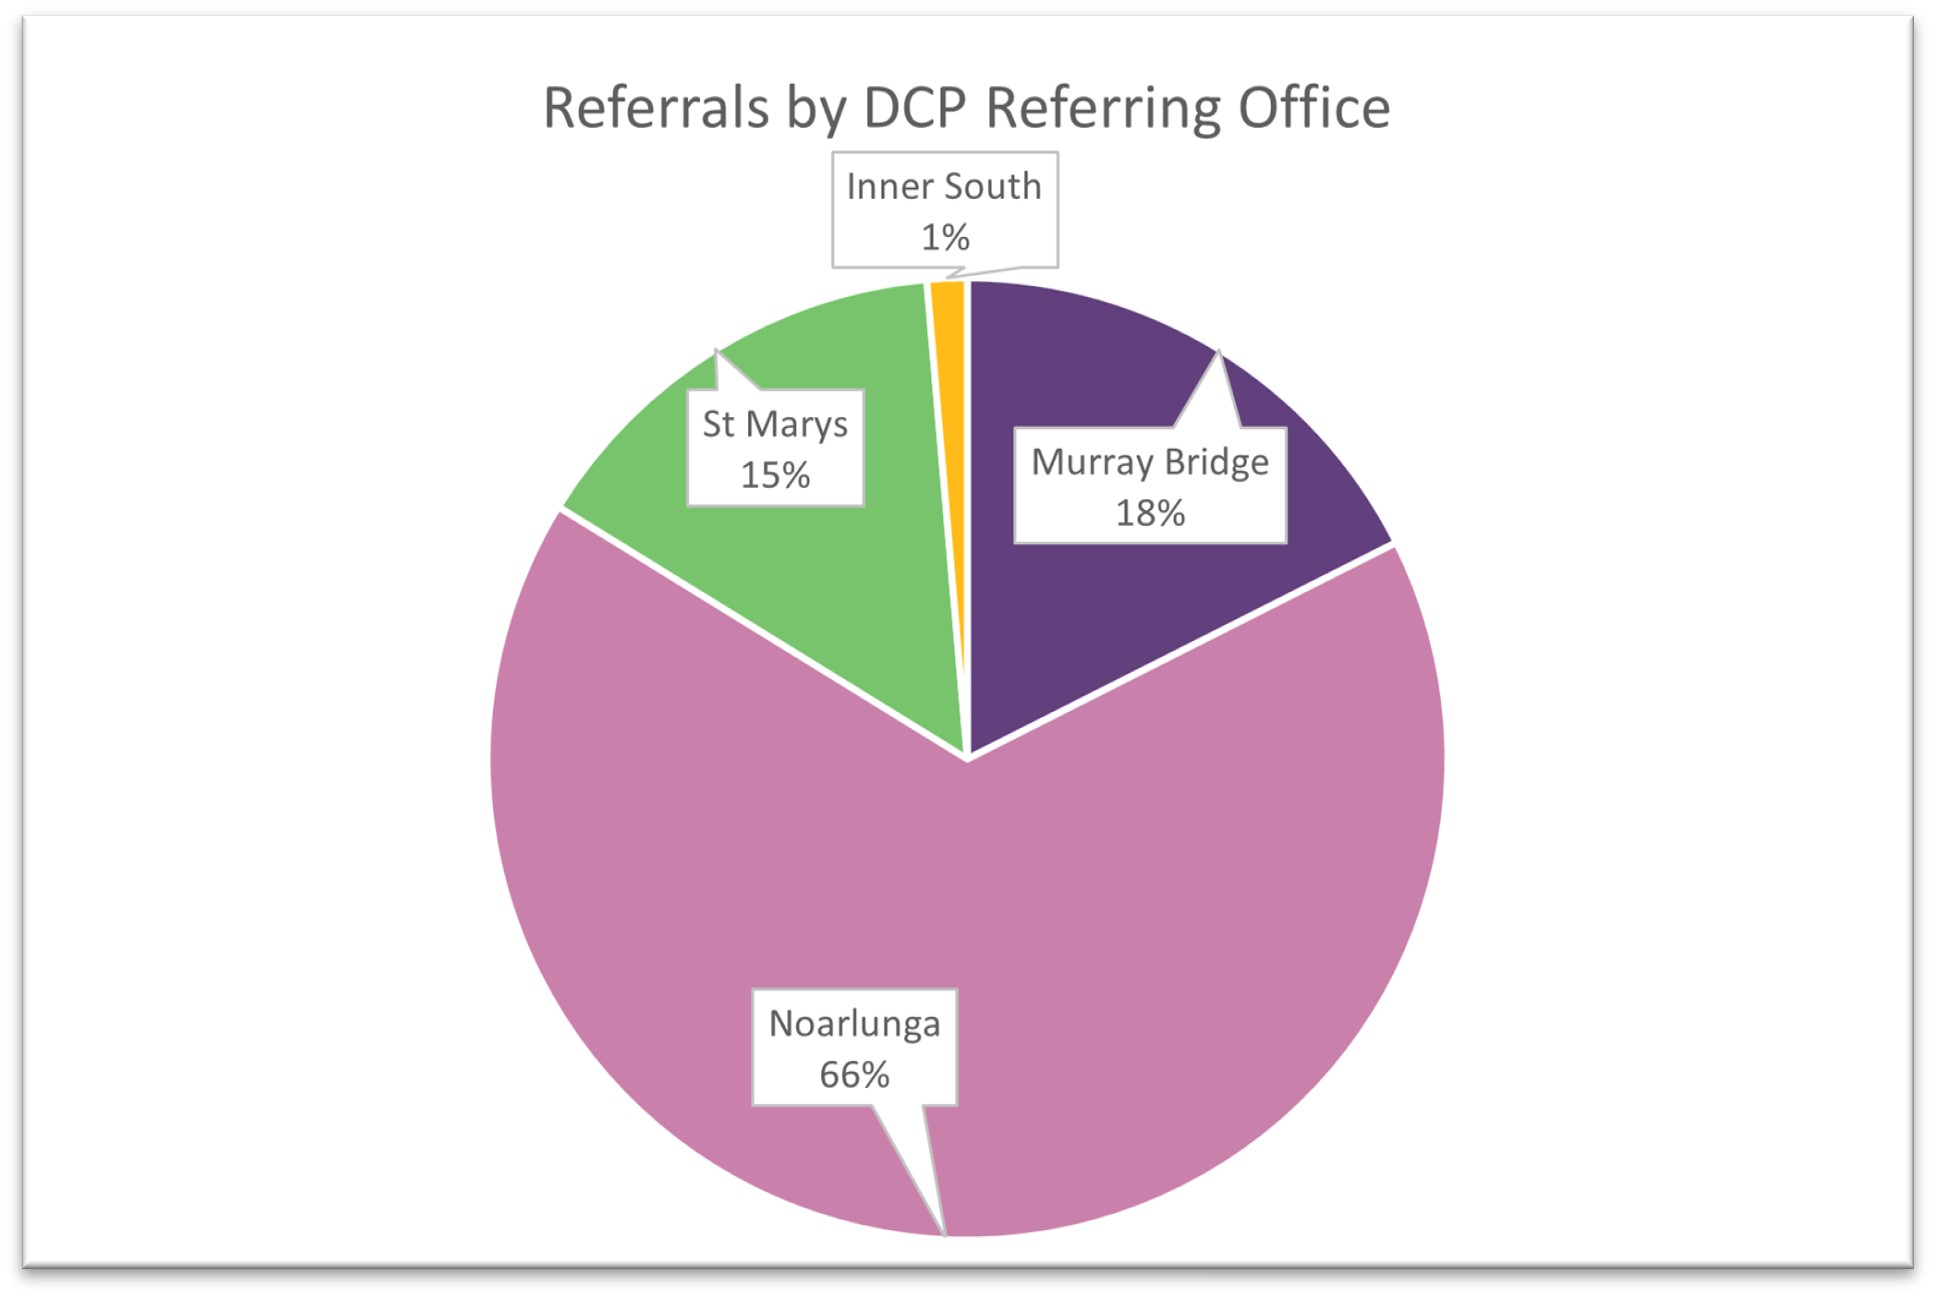 Pie graph showing the distribution of referrals from 4 offices. Noarlunga had the greatest referrals at 66 per cent, followed by Murray Bridge at 18 per cent, and St Marys at 15 per cent. Inner South had only 1 per cent of referrals. 